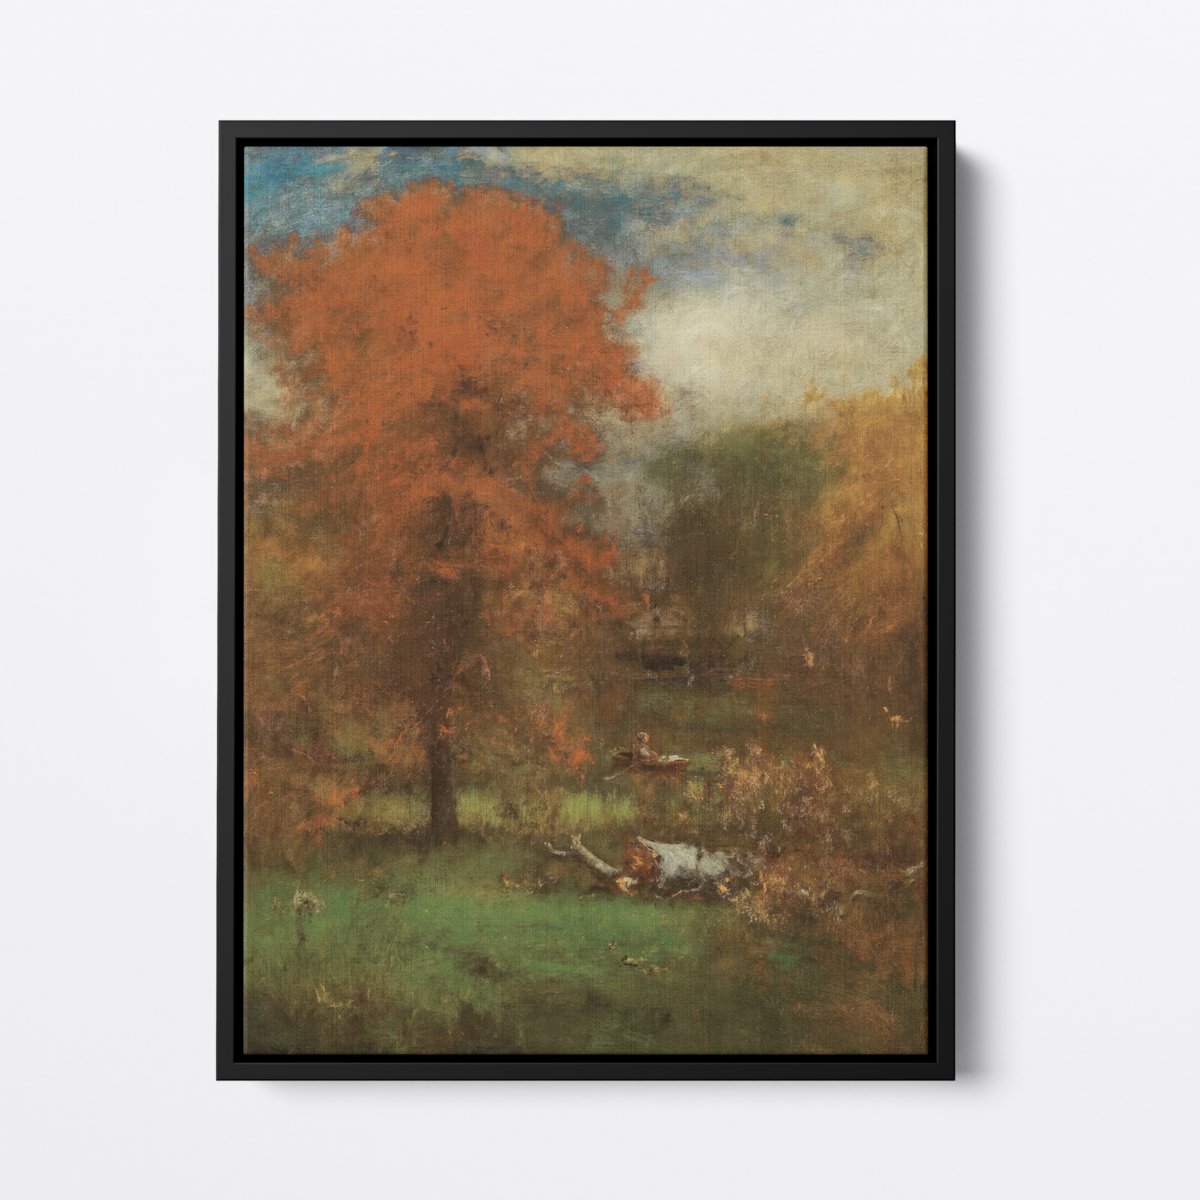 Abstract Autumn | George Inness | Ave Legato | Canvas Art Prints | Vintage Artwork